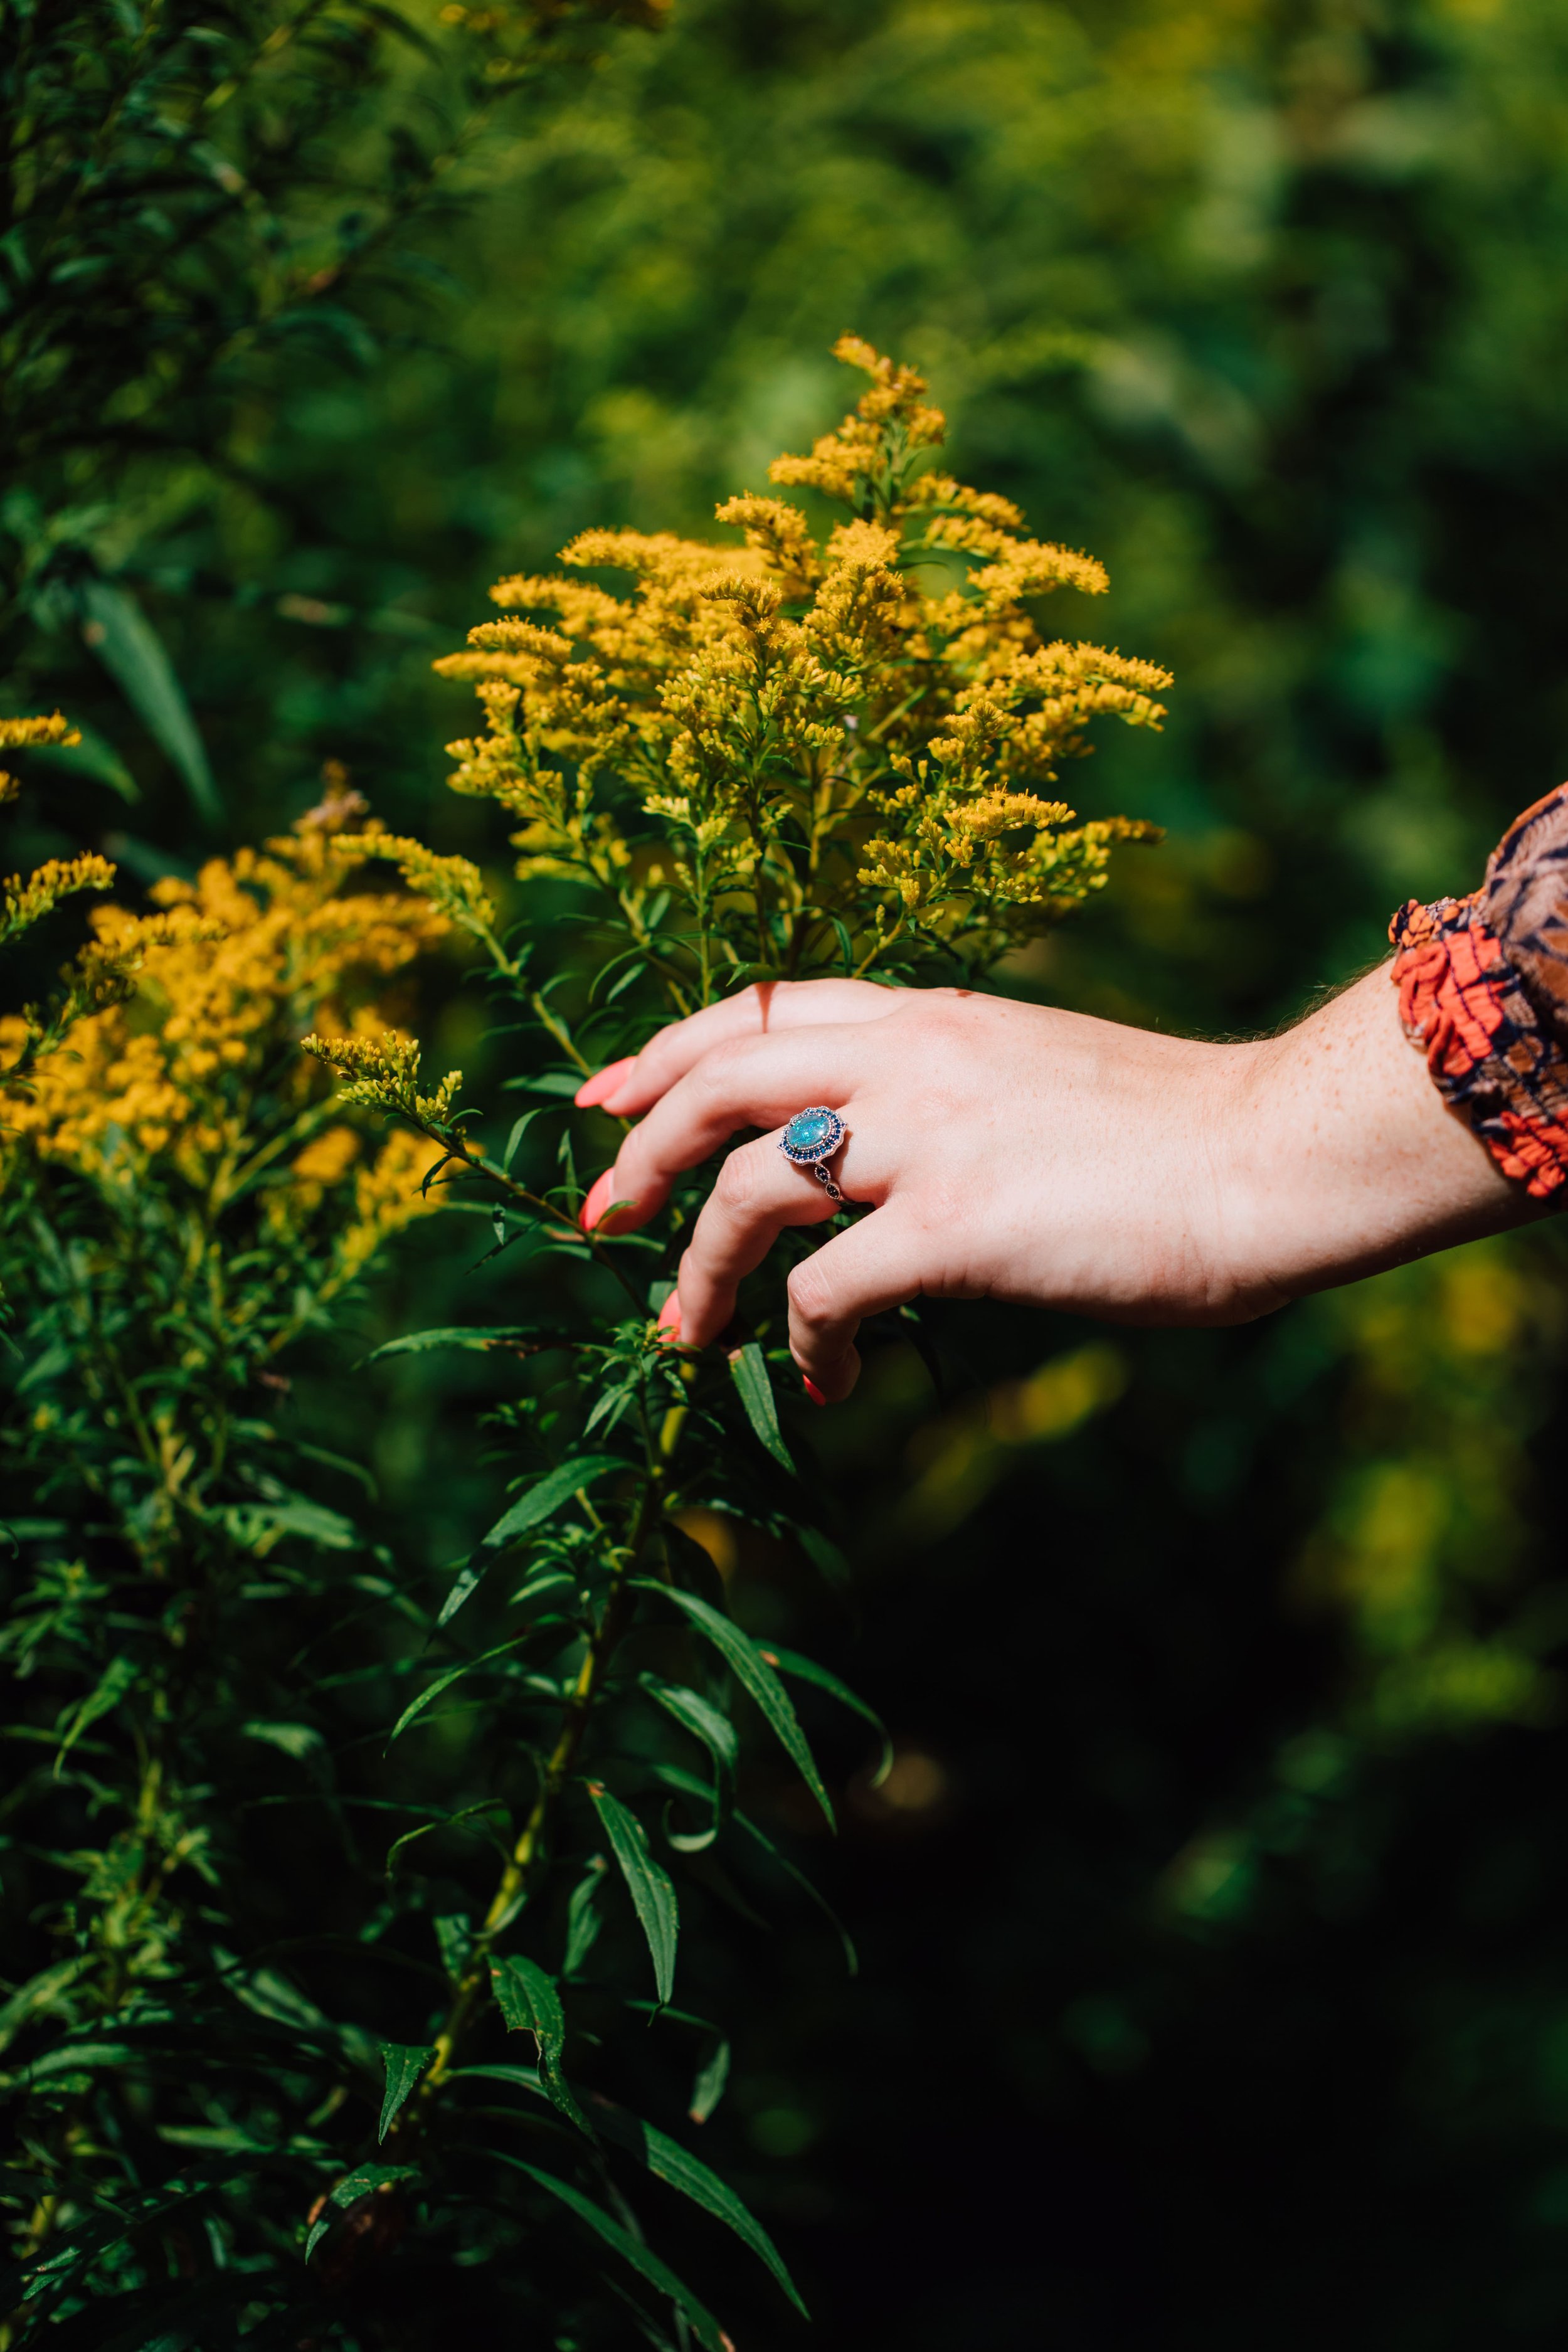  katie rests her hand in front of some growing goldenrod to show her engagement ring during a session with central ny photographer at rice creek field station 